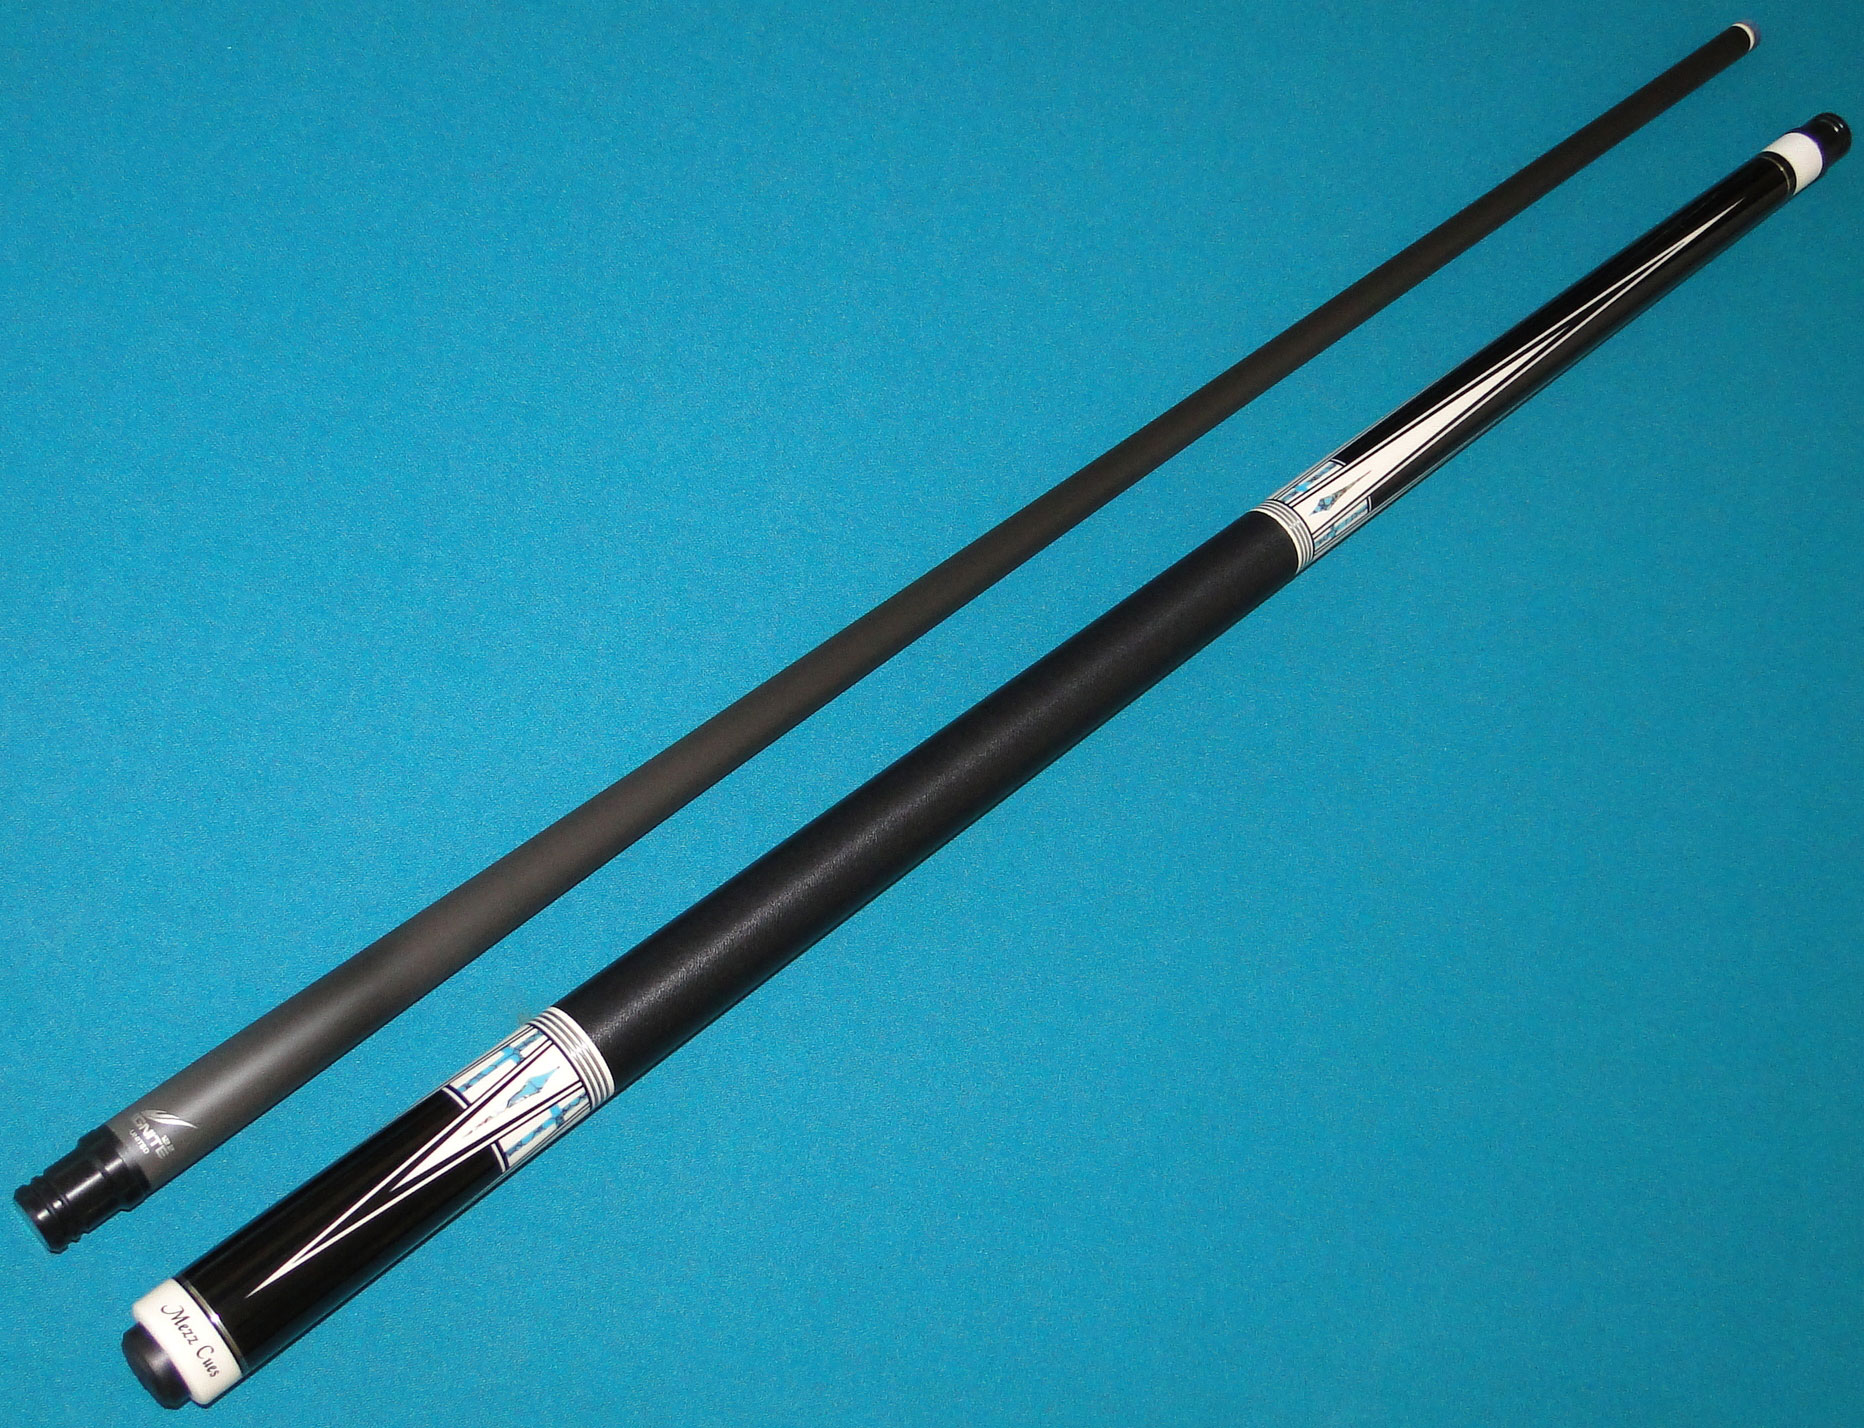 Mezz and Exceed cues with Ignite shaft